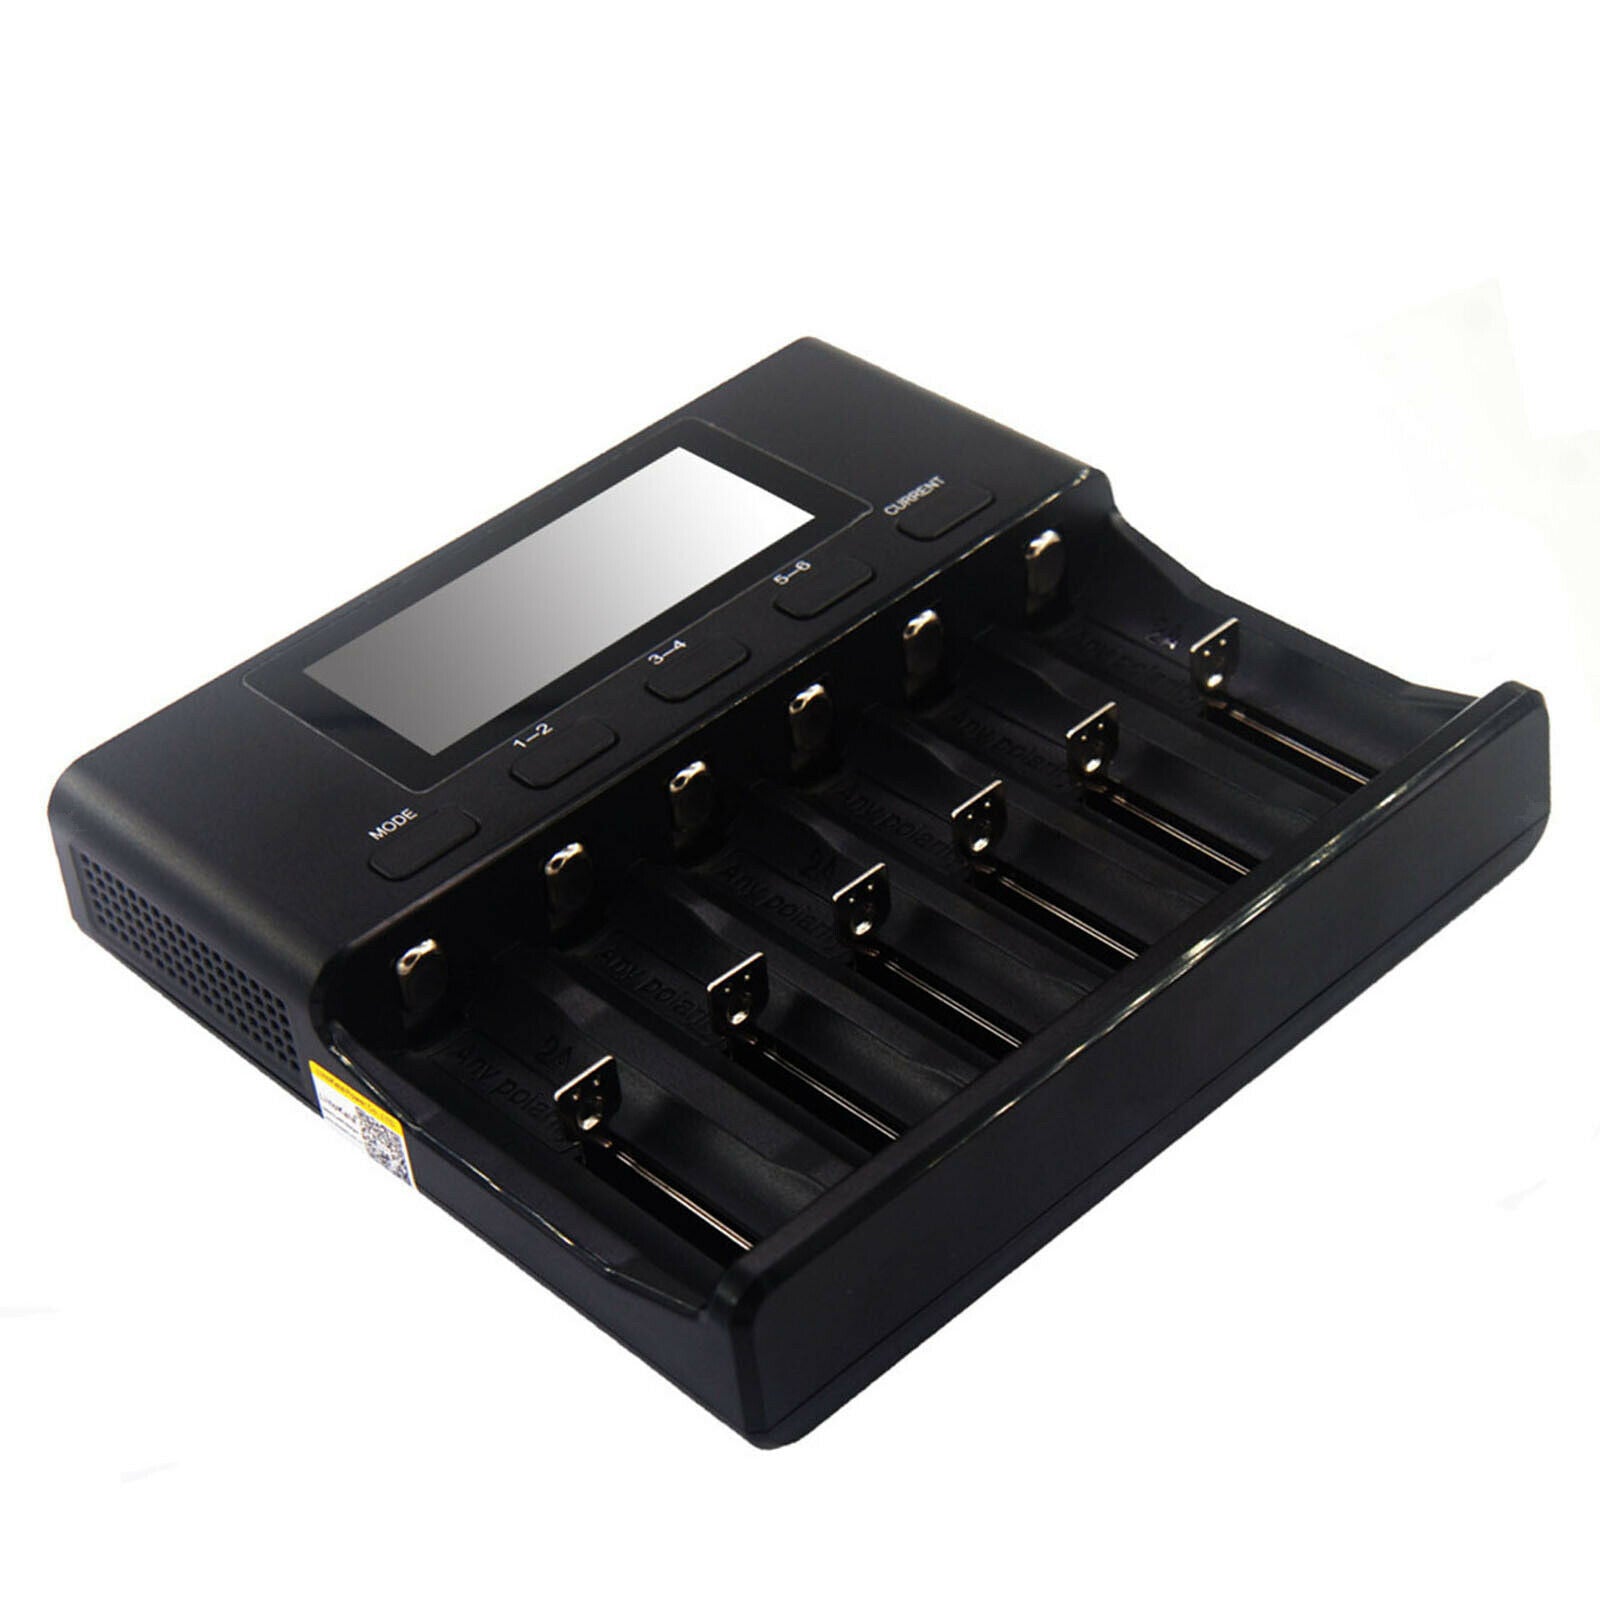 18650 Battery Charger Auto-Polarity Detection for 18350 14500 Batteries